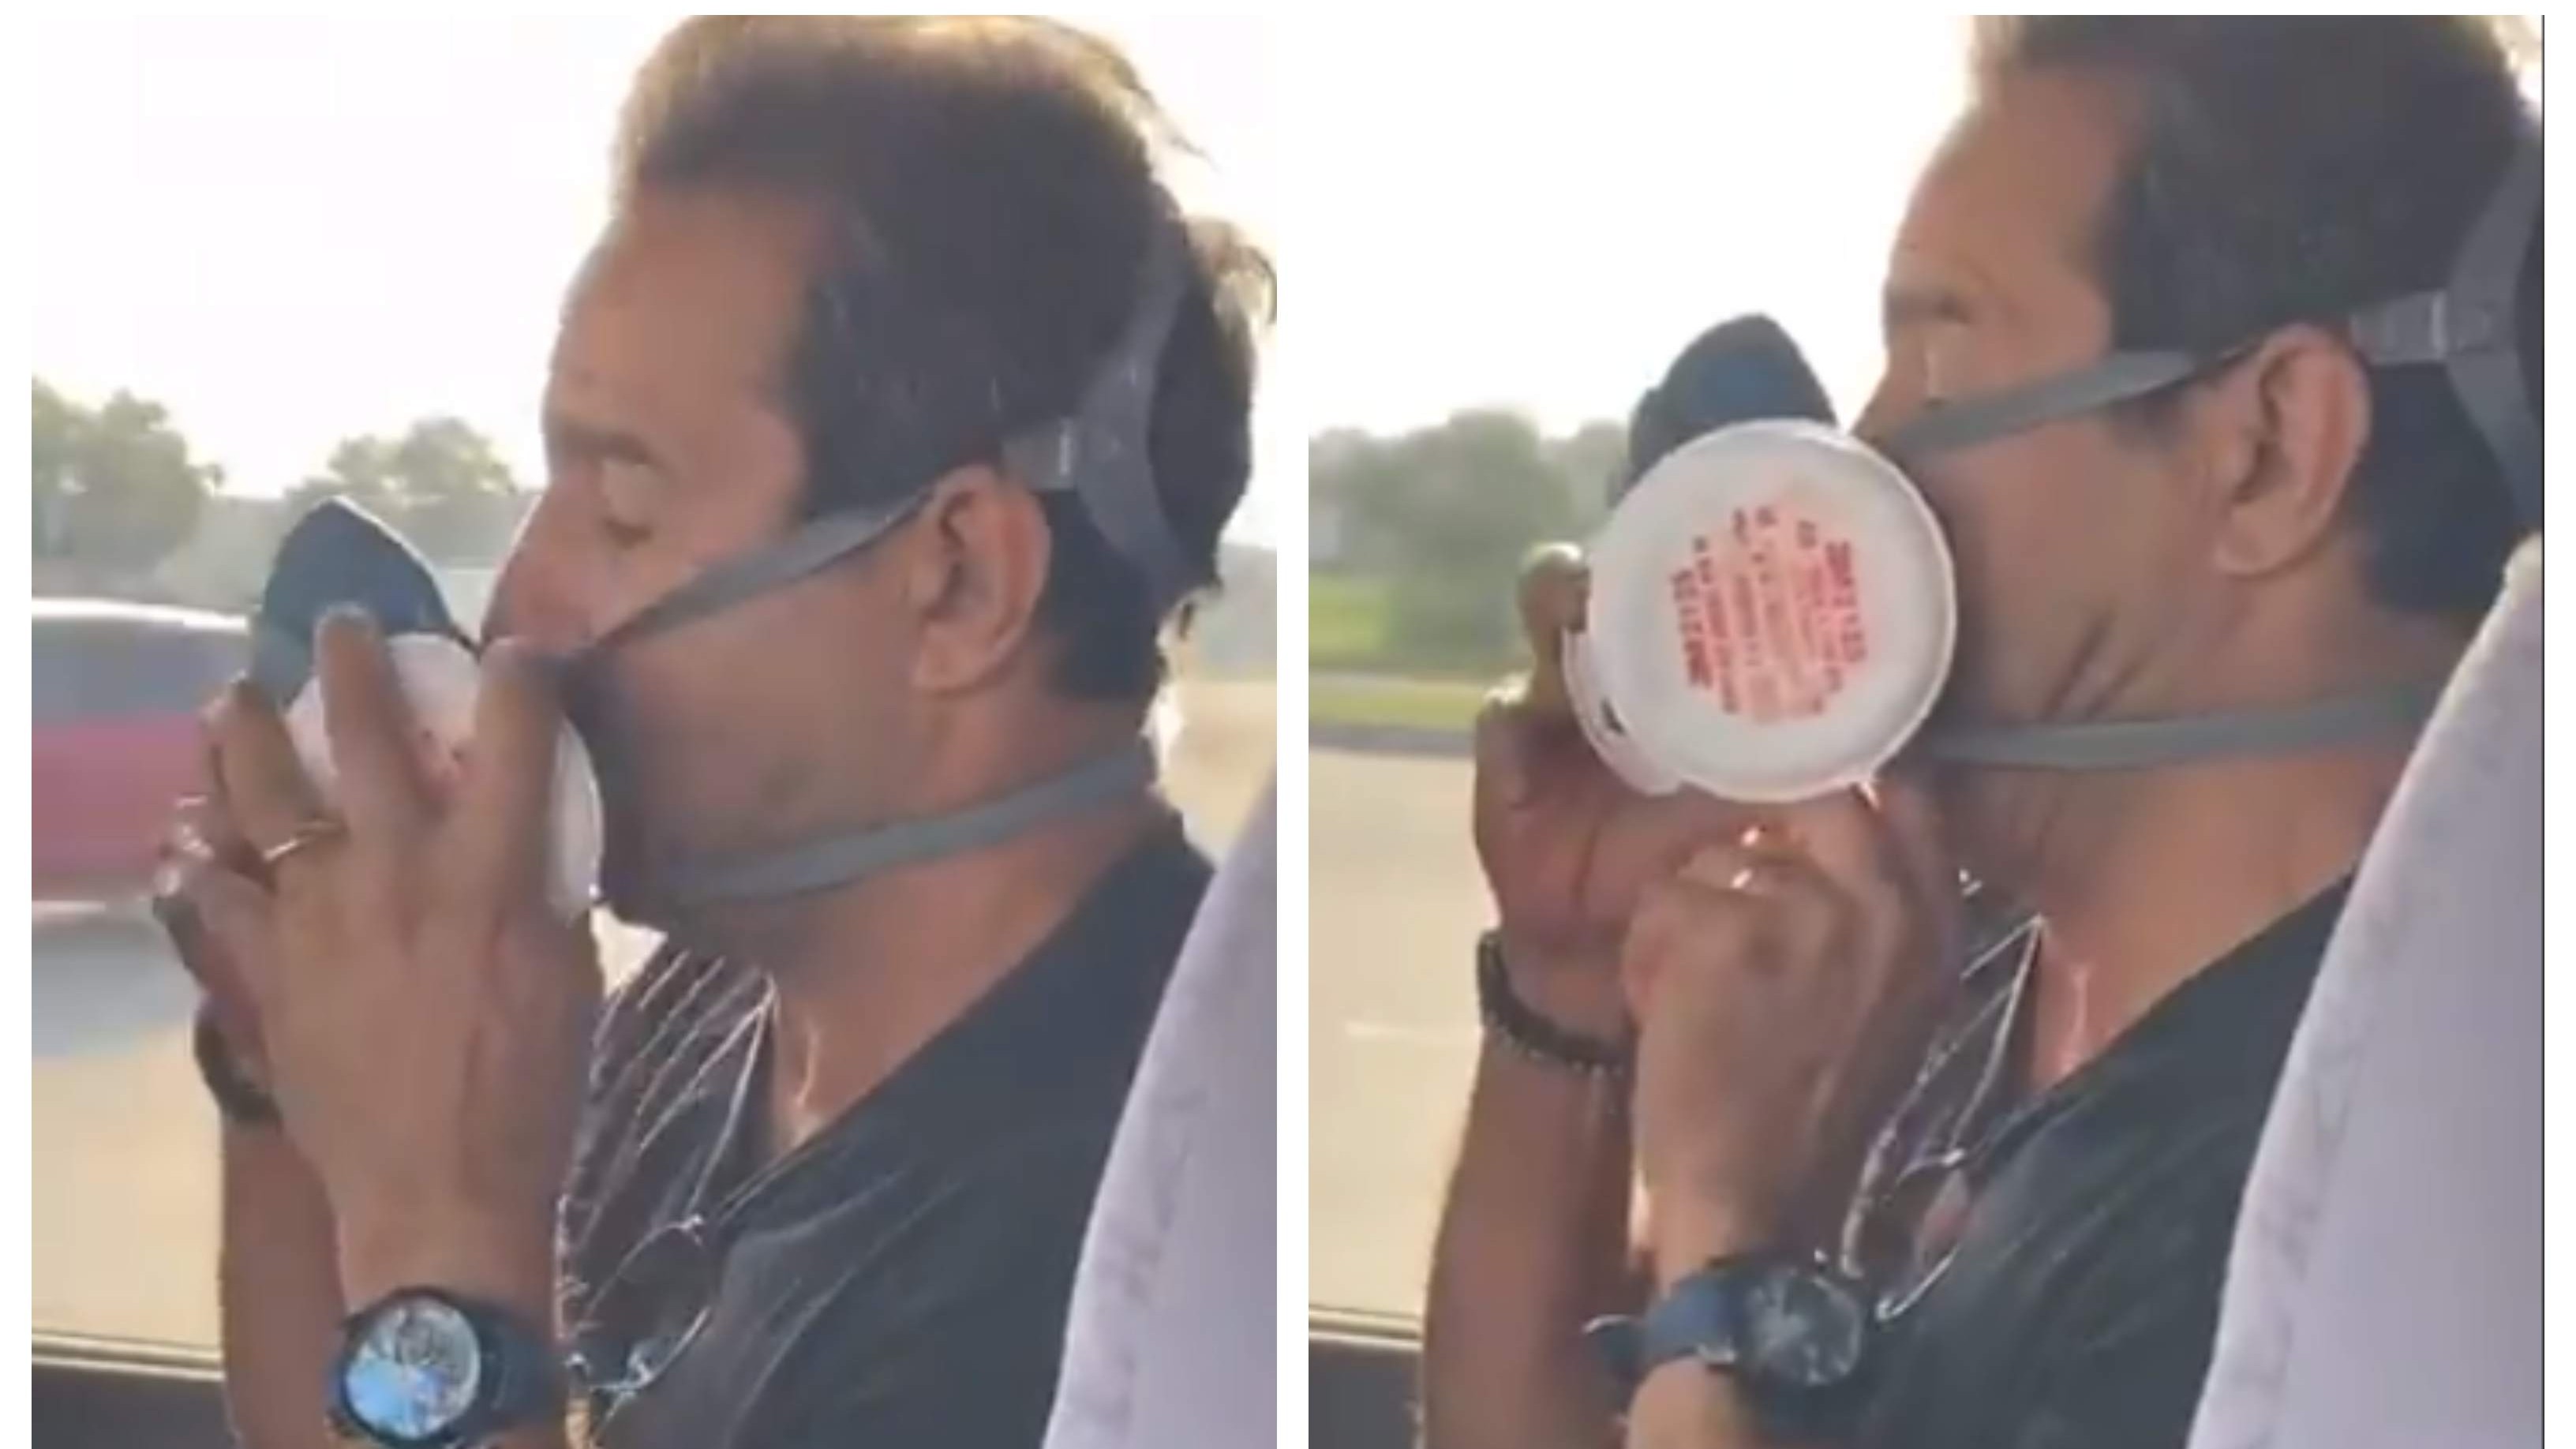 WATCH: Wasim Akram struggles to fix air purifying mask on his lower face amid COVID-19 crisis